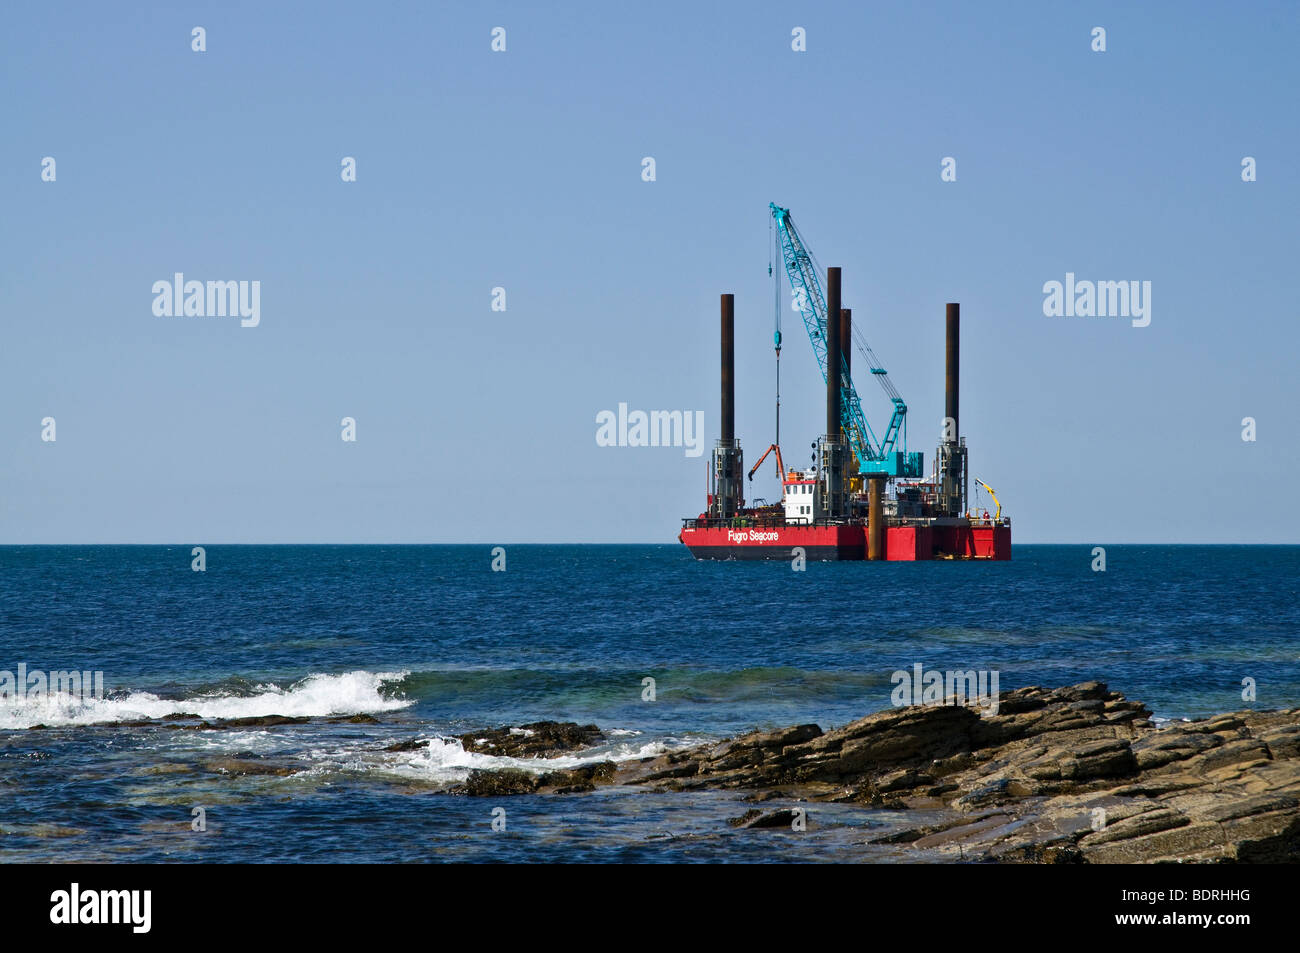 dh Tidal Power ELECTRICITY UK Fugro Seacore platform positioning test rig off shore Billia Croo Orkney Stock Photo